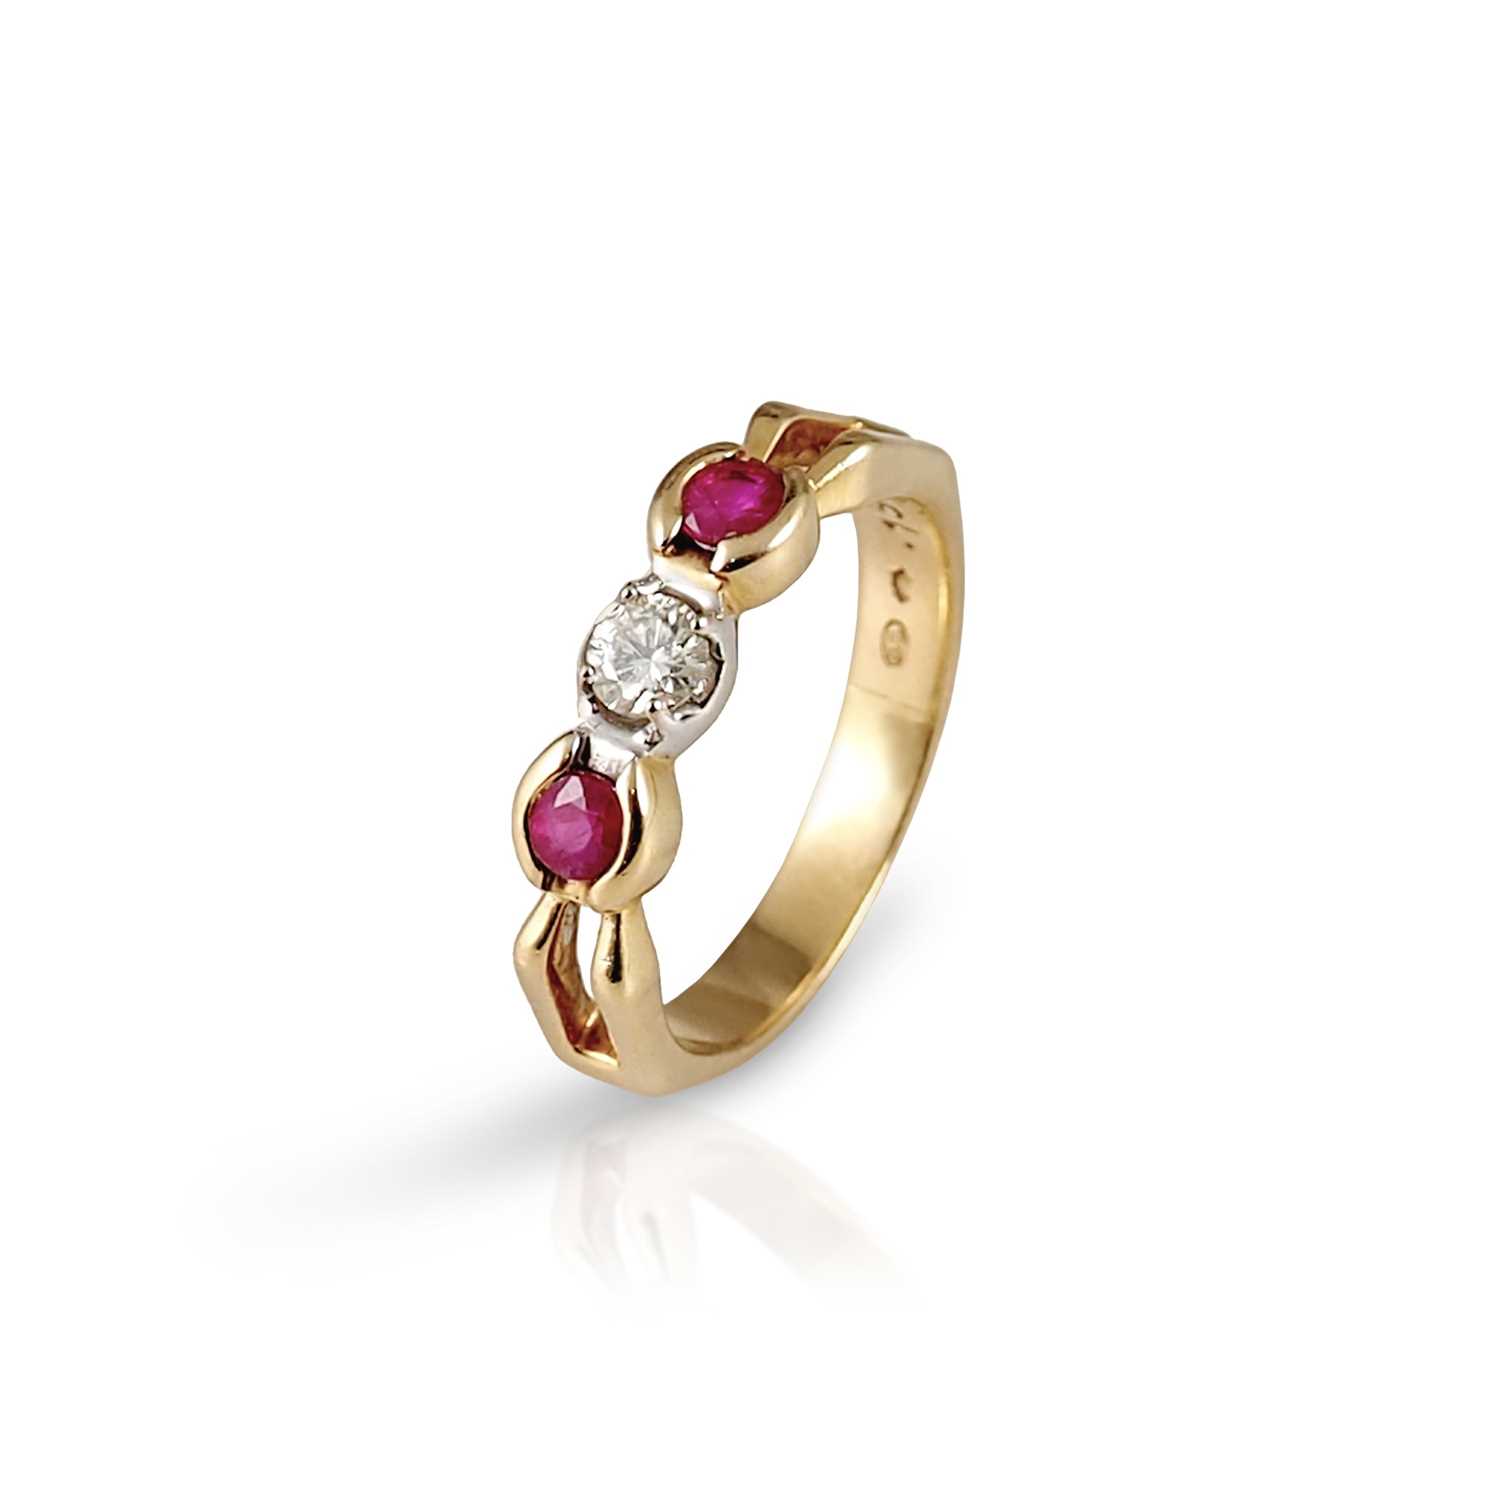 Lot 556 - 14K Gold Ruby and Diamond Ring